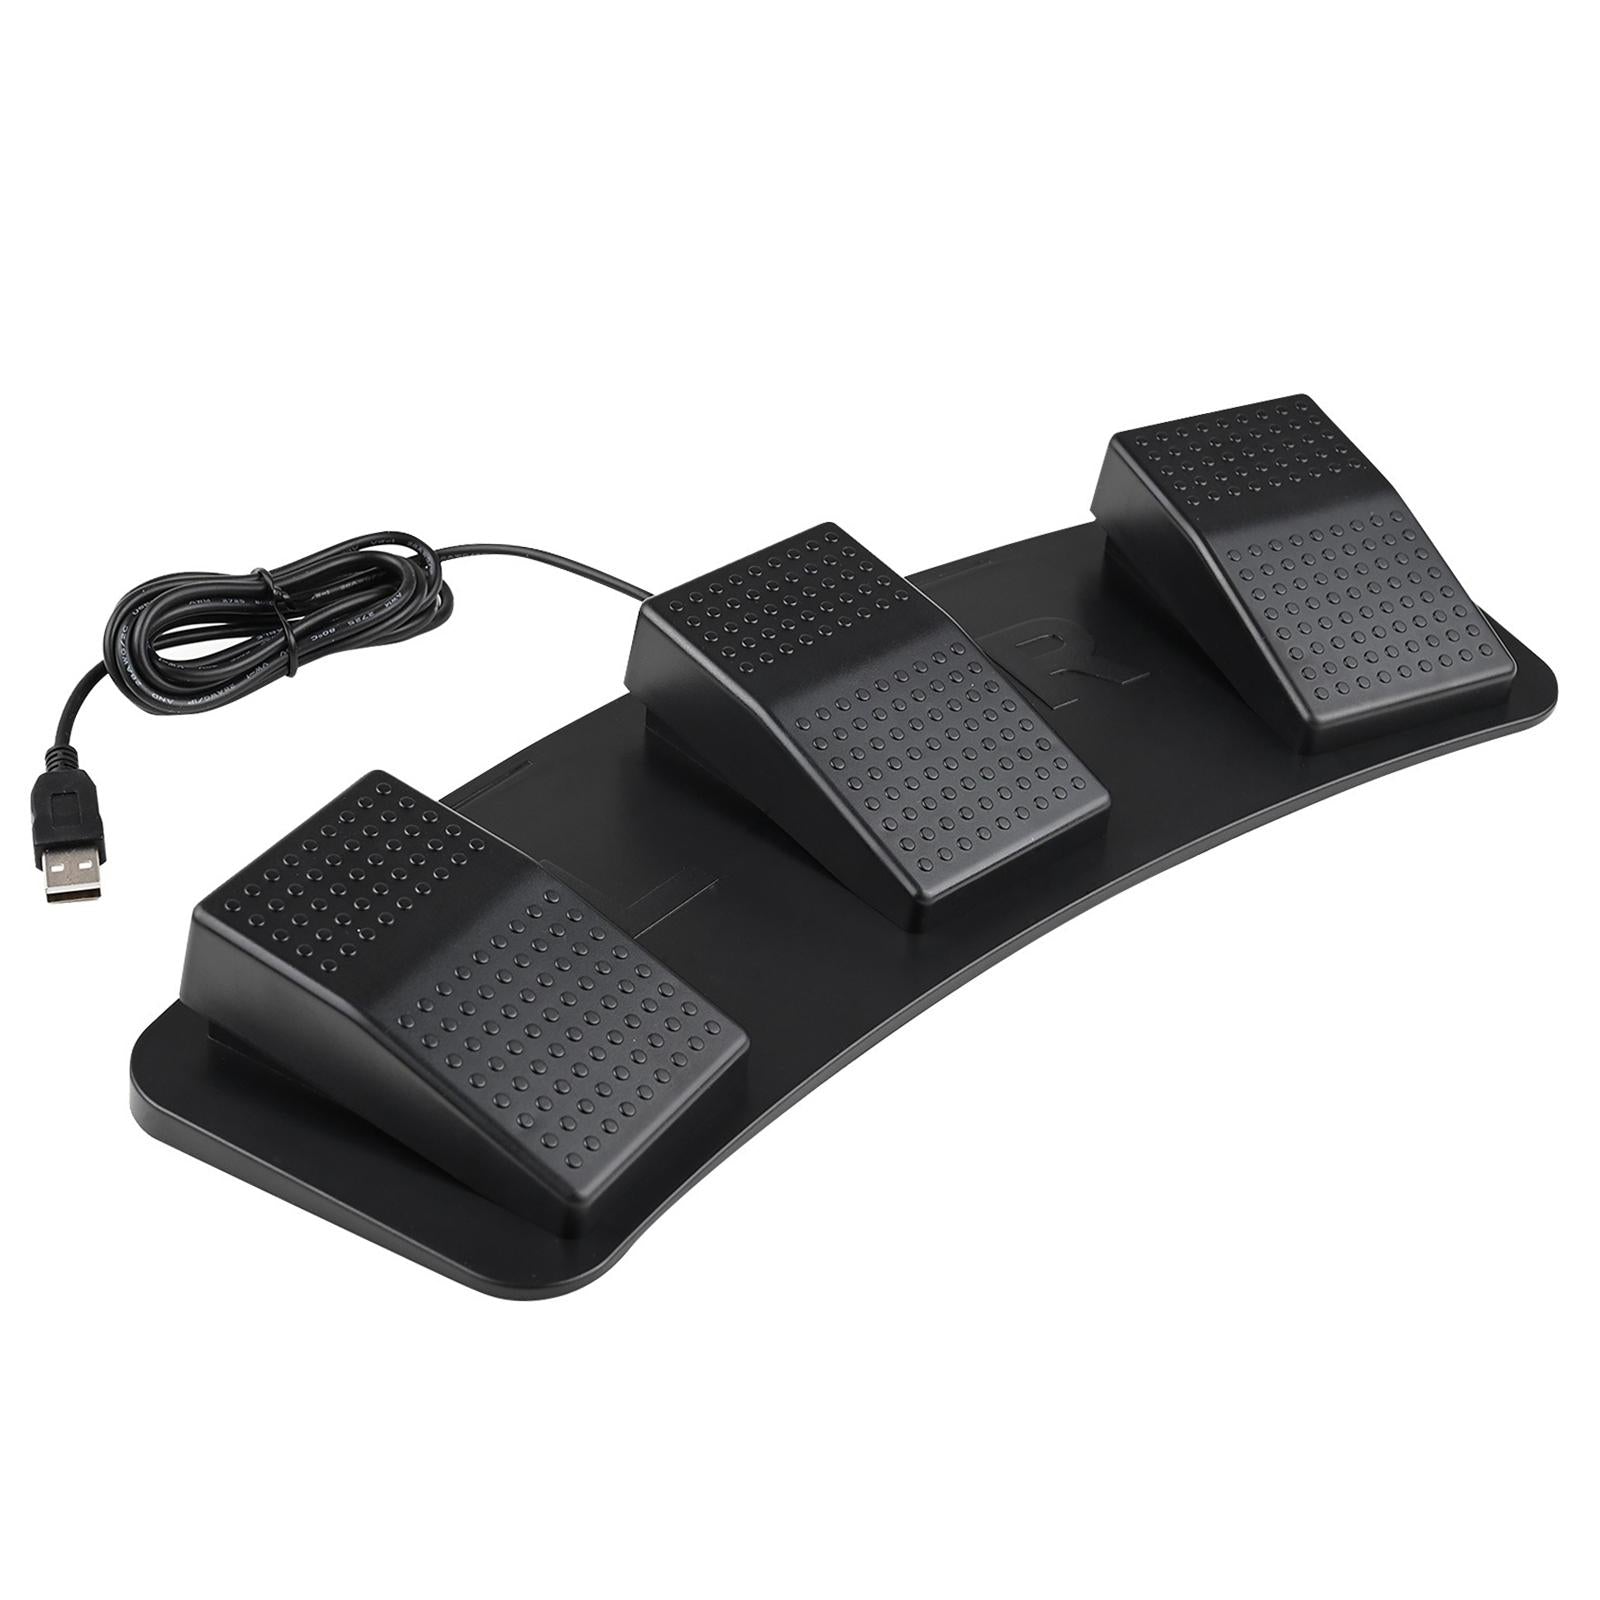 Upgraded USB Three Foot Switch PC Game Foot Pedal for Gaming Equipment